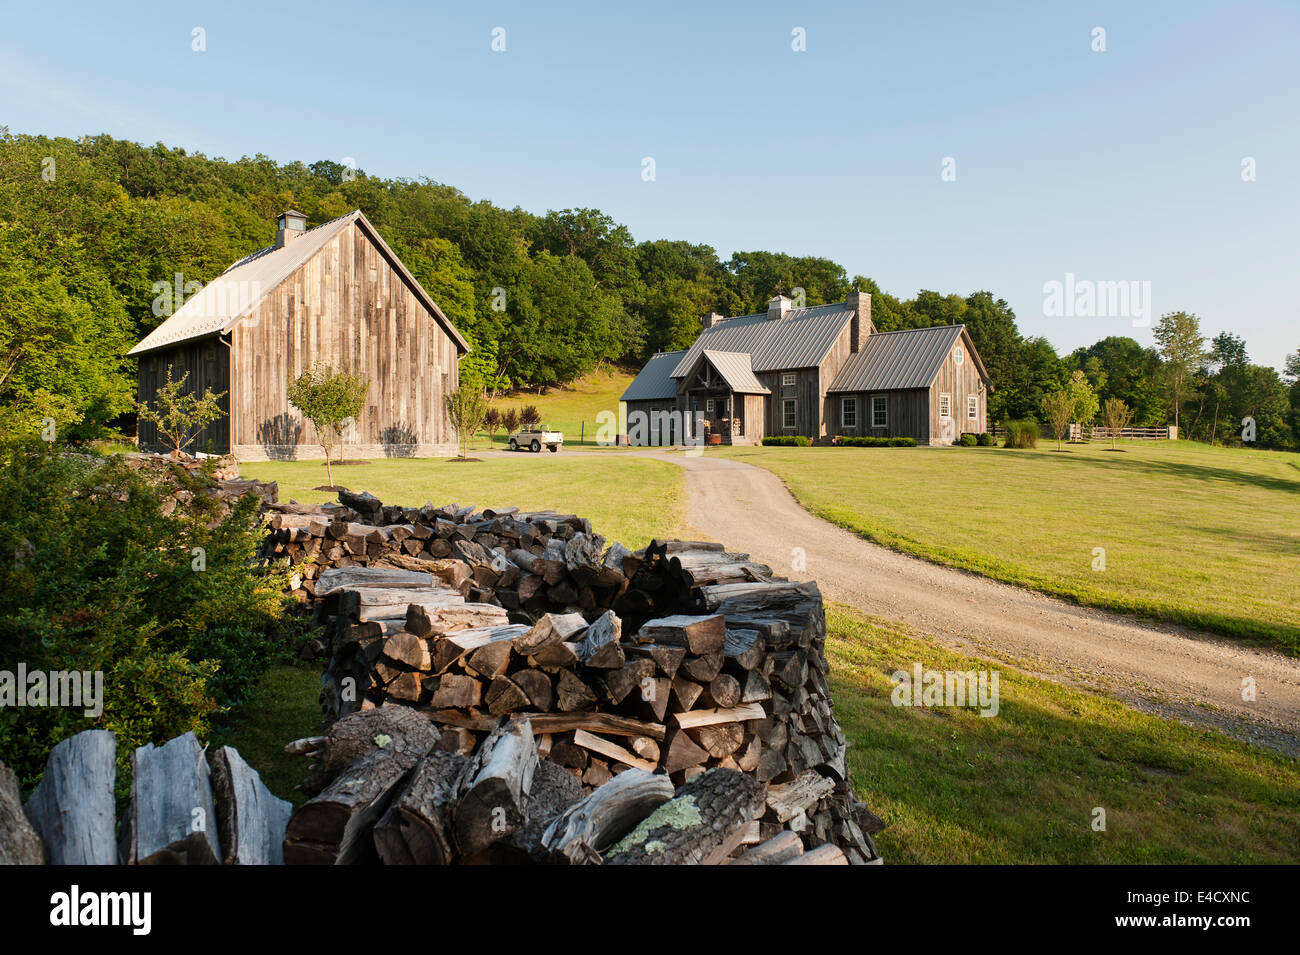 Circular stacks of firewood along driveway to timber framed clad house Stock Photo